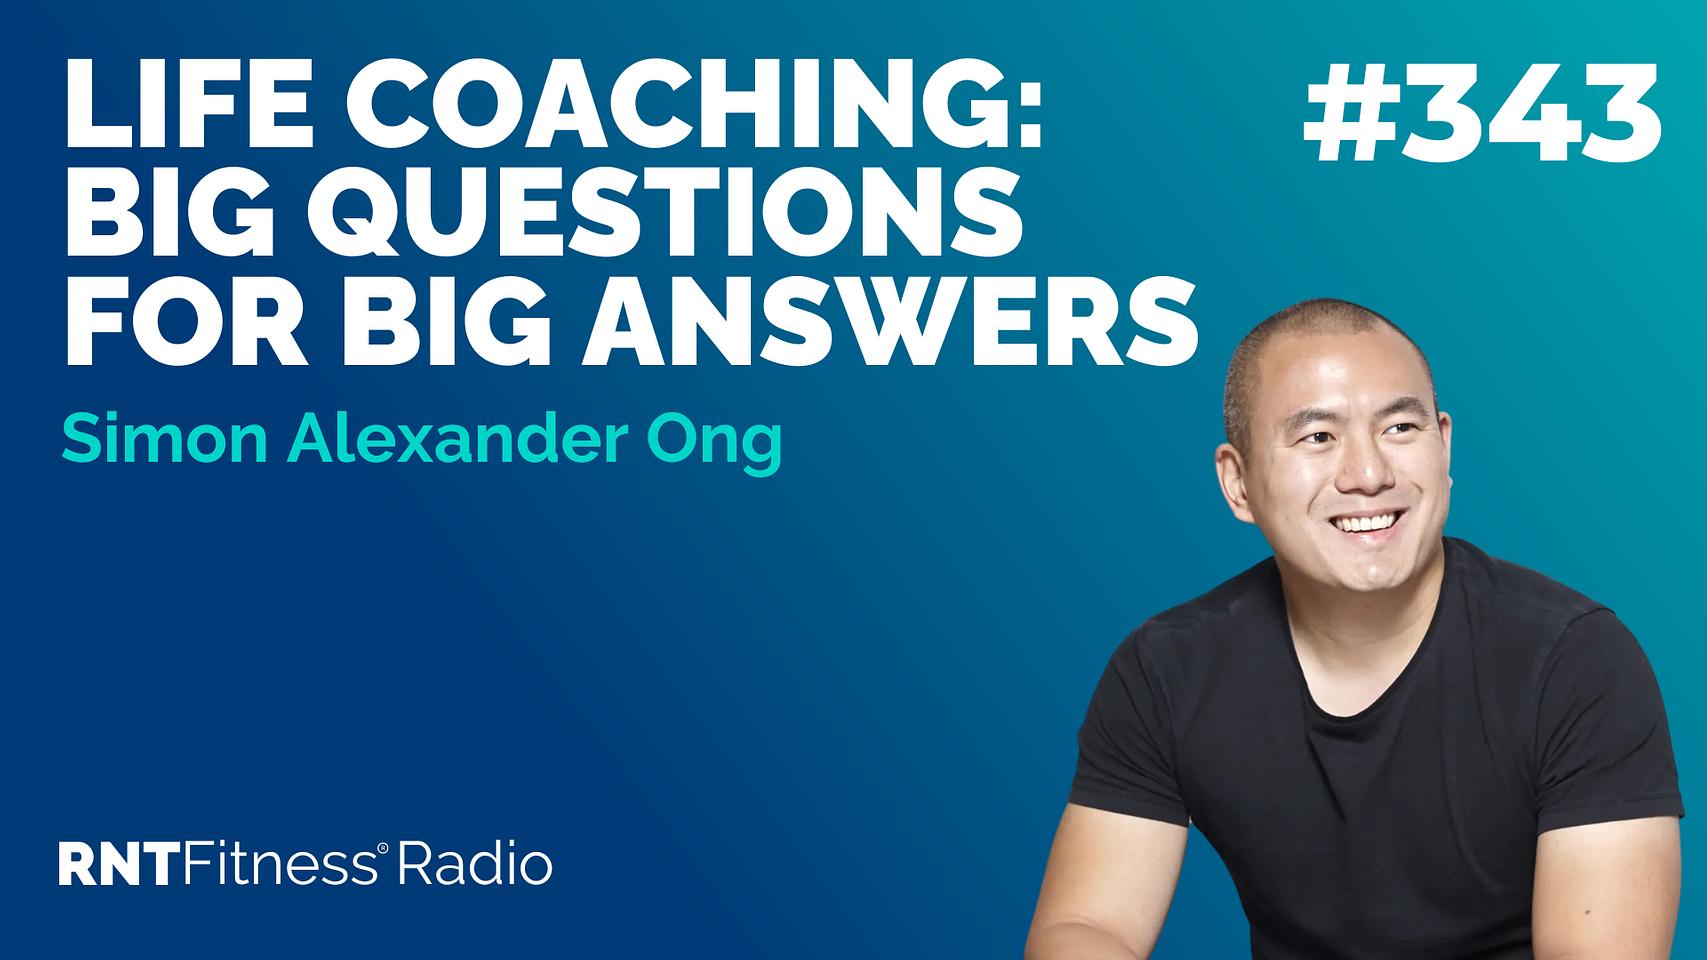 Ep 343 - Life Coaching: Big Questions For Big Answers w/ Simon Alexander Ong